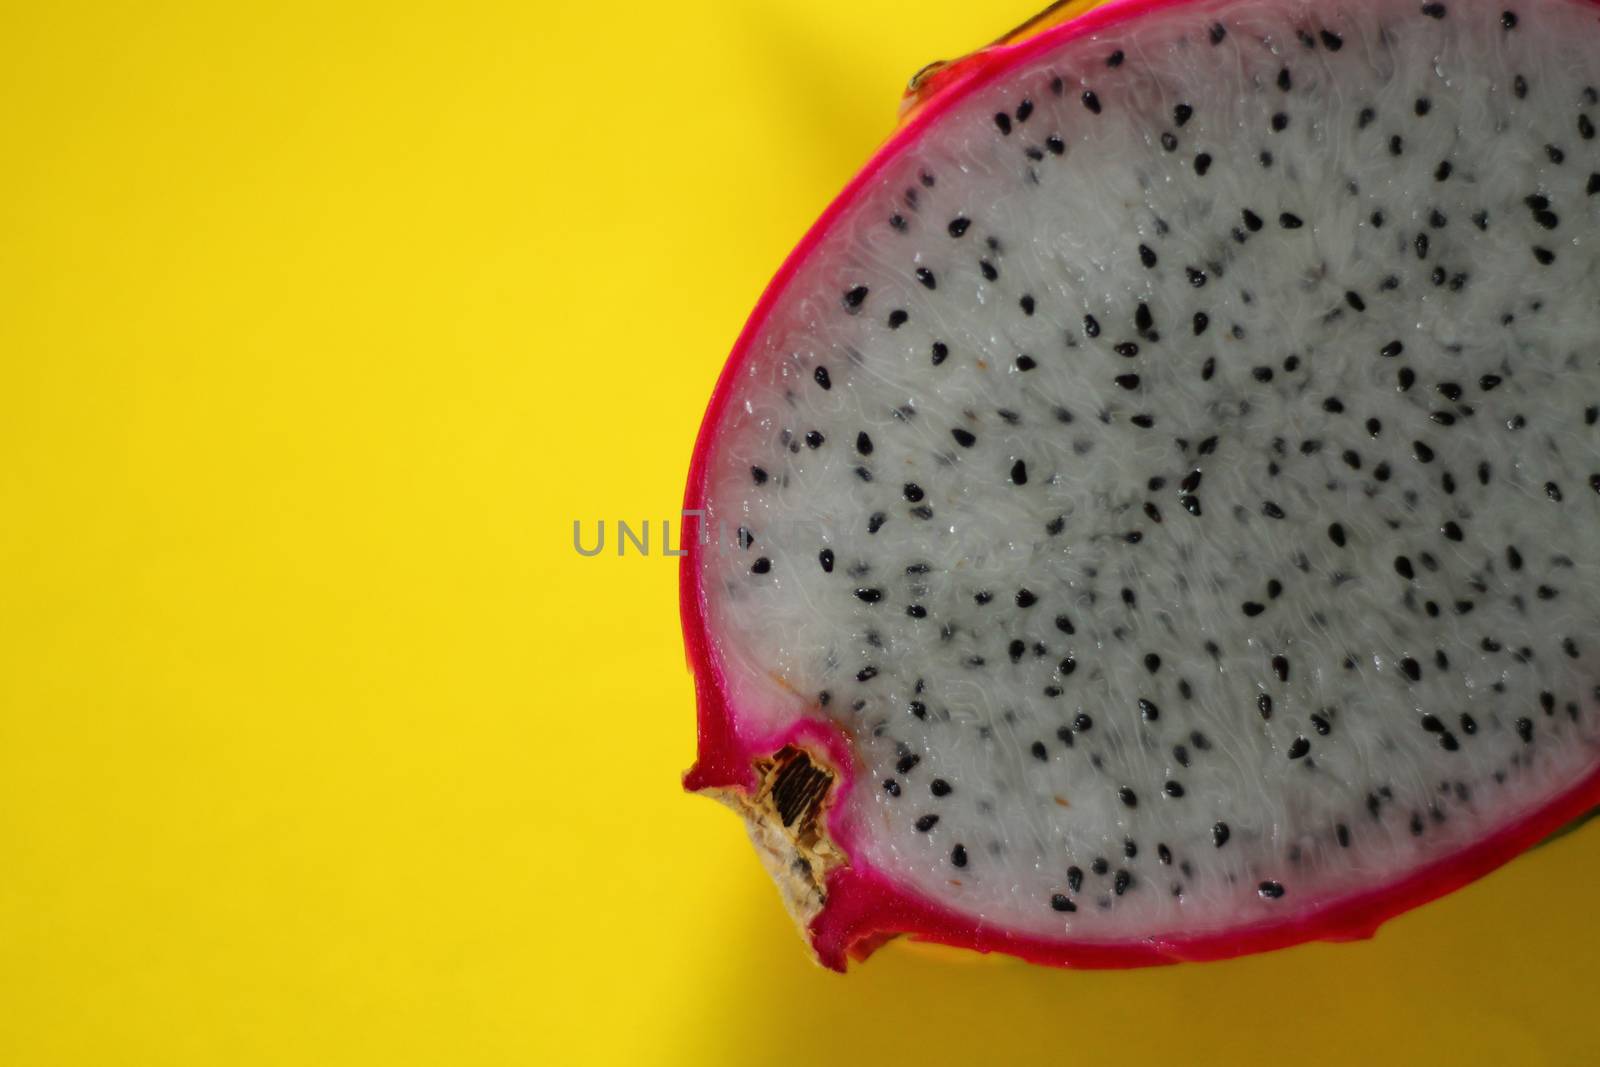 A sliced dragon fruit against a yellow background by Sonnet15